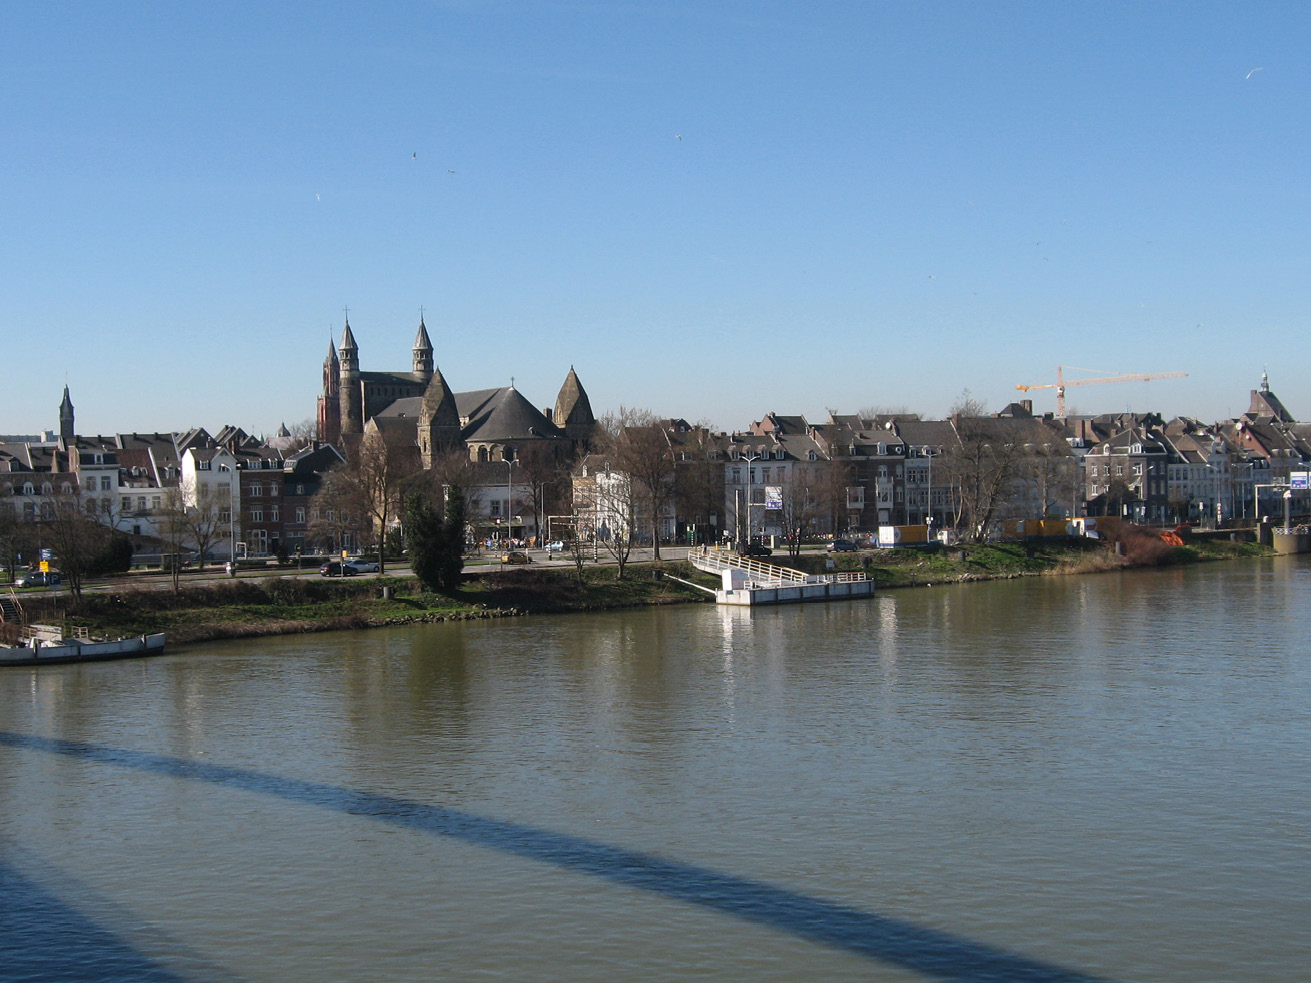 Fig. 16  The River Maas, photographed from the bridge, with a view of the medieval Marian church. Photo: Kathryn M. Rudy.